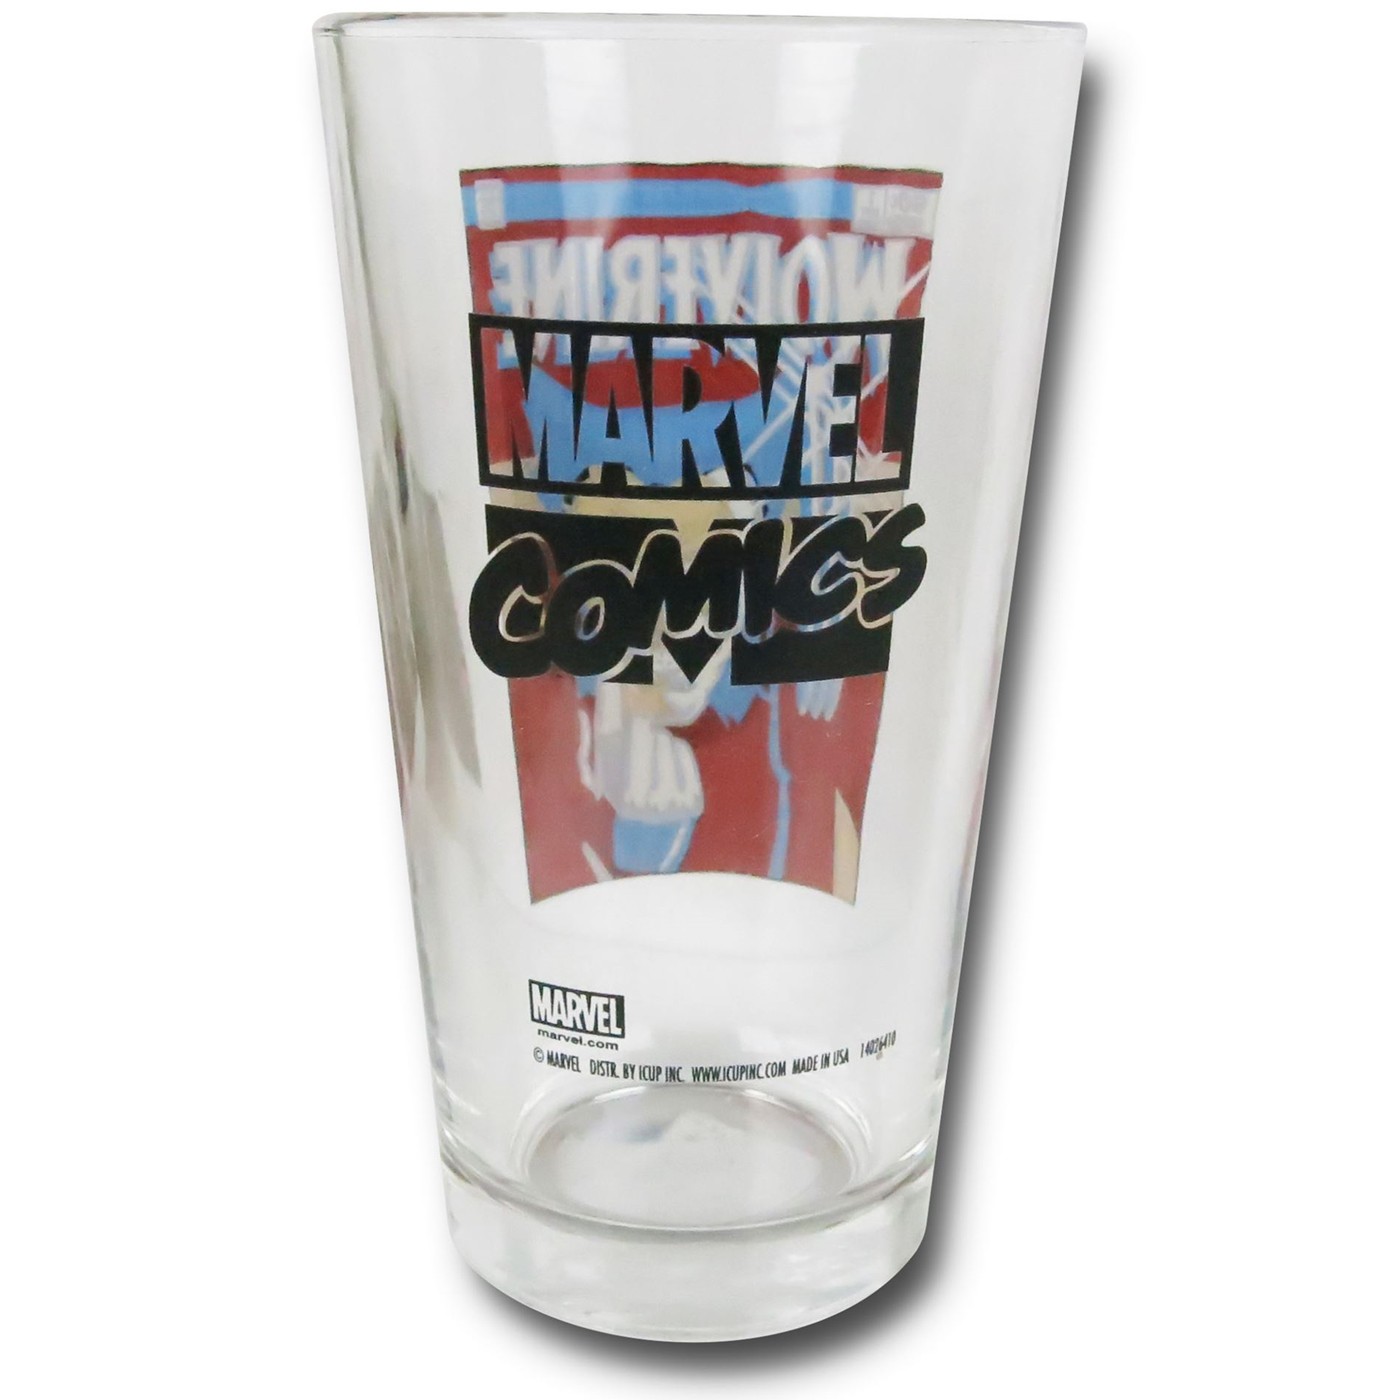 Wolverine Classic Cover Pint Glass